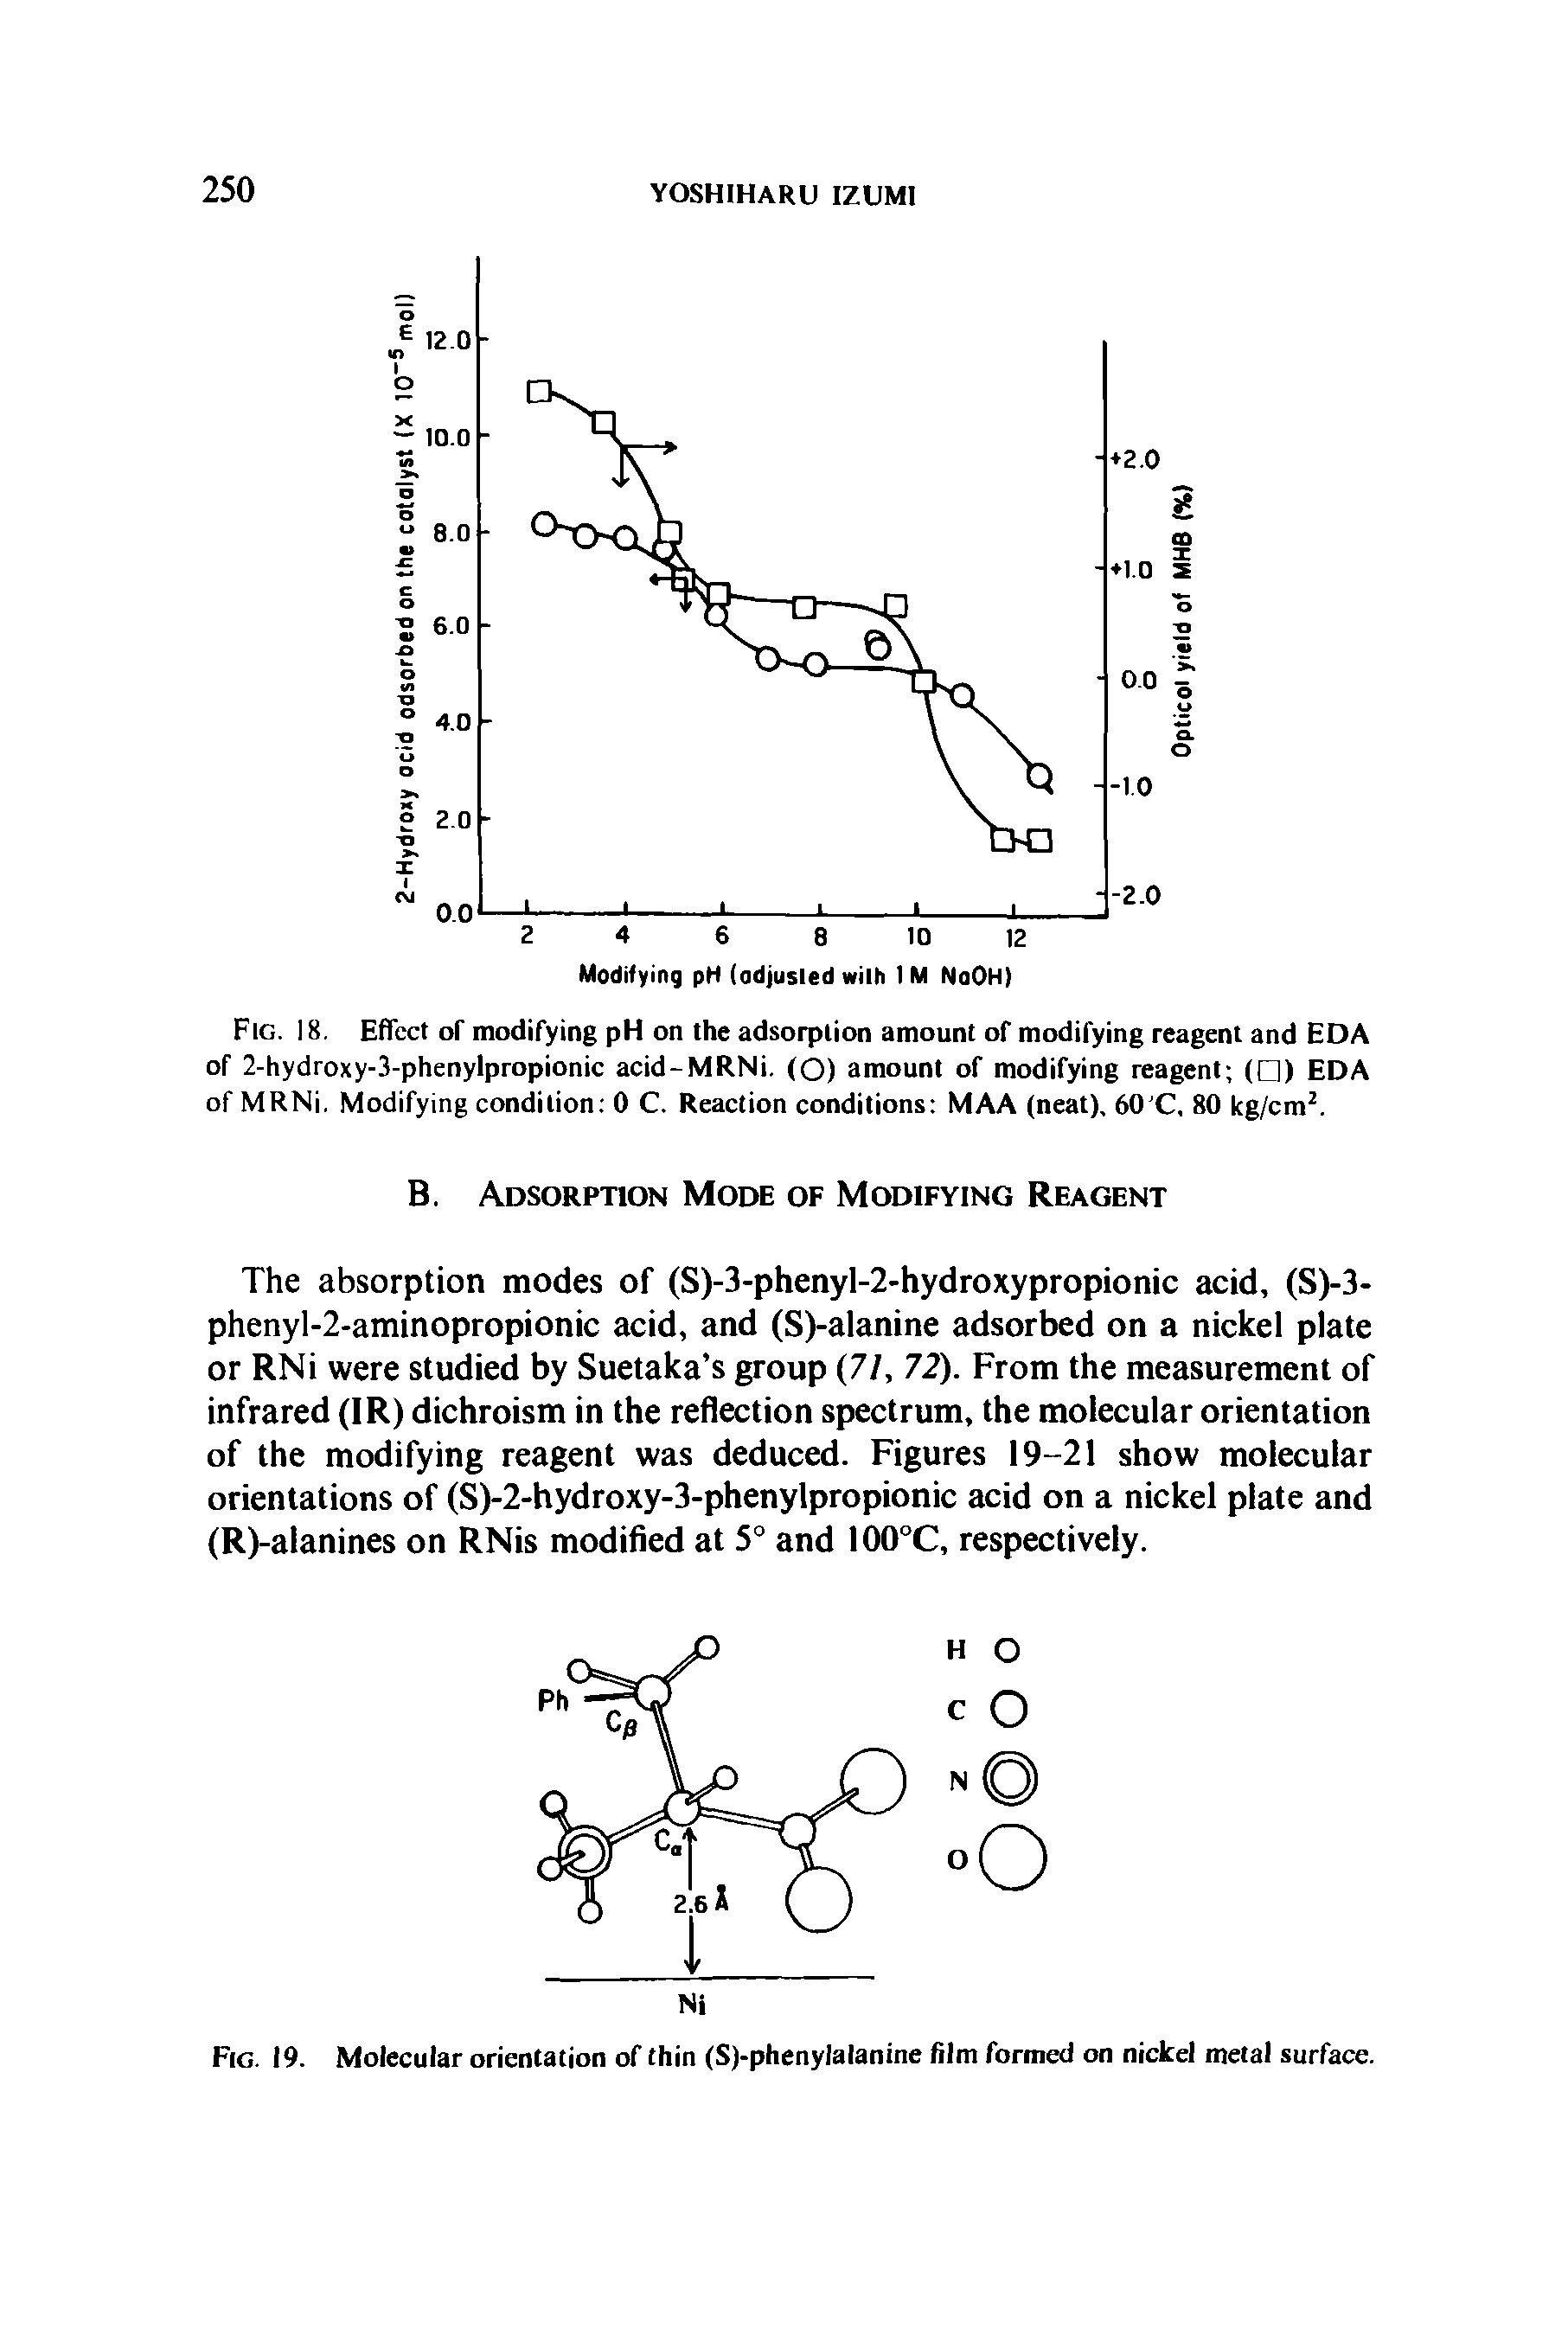 Fig. 18. Effect of modifying pH on the adsorption amount of modifying reagent and EDA of 2-hydroxy-3-phenylpropionic acid-MRNi. (O) amount of modifying reagent ( ) EDA of MRNi. Modifying condition 0 C. Reaction conditions MAA (neat), 60 C, 80 kg/cm2.